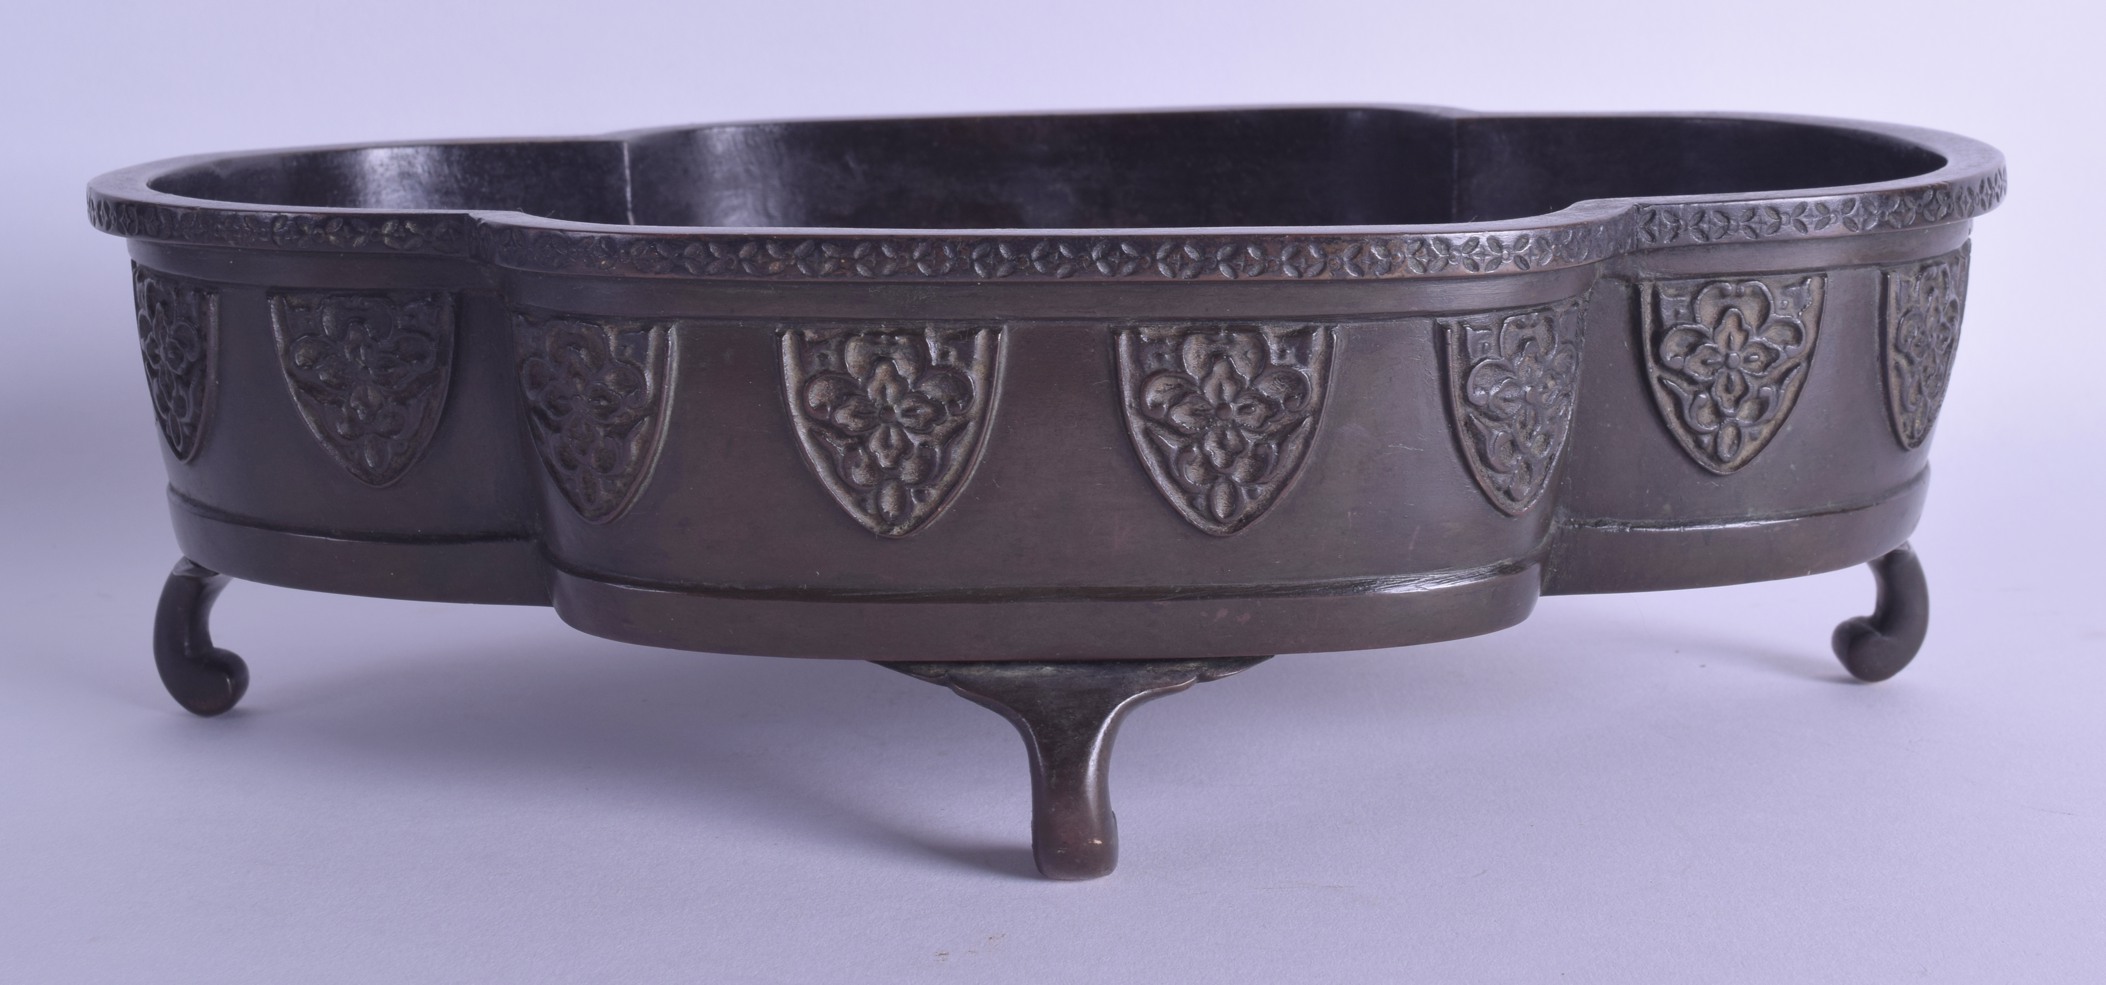 A 19TH CENTURY JAPANESE MEIJI PERIOD BRONZE LOBED CENSER decorated with floral vines. 29 cm x 19.5